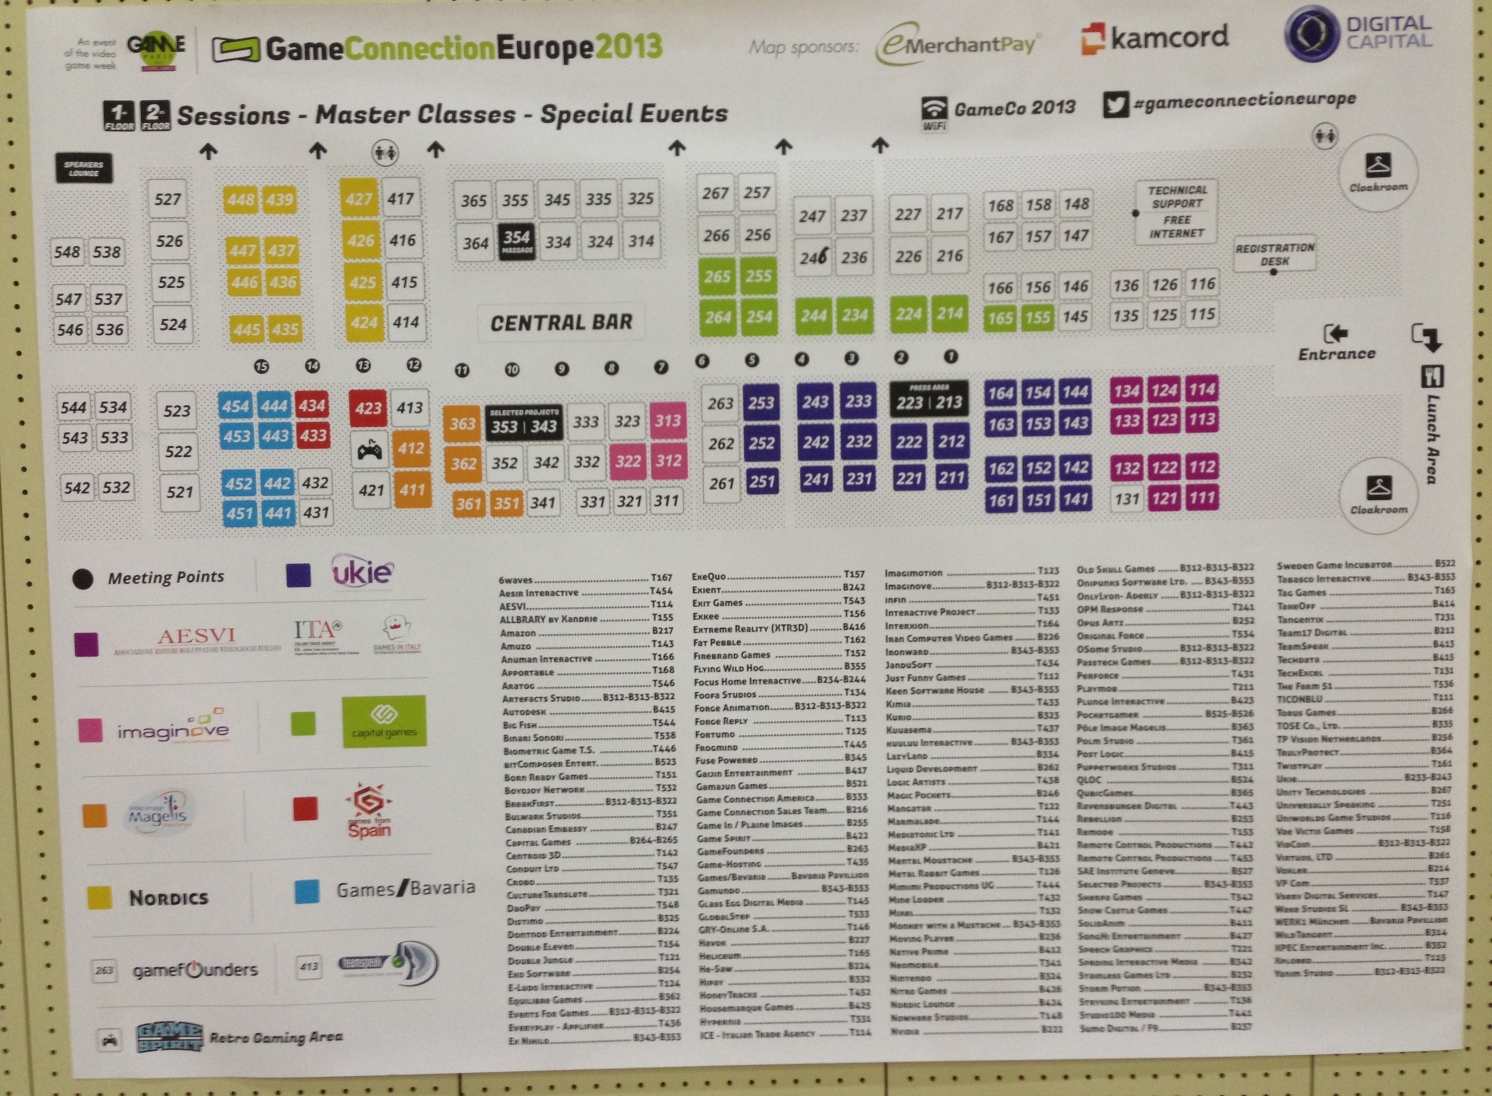 GC Europe conference map